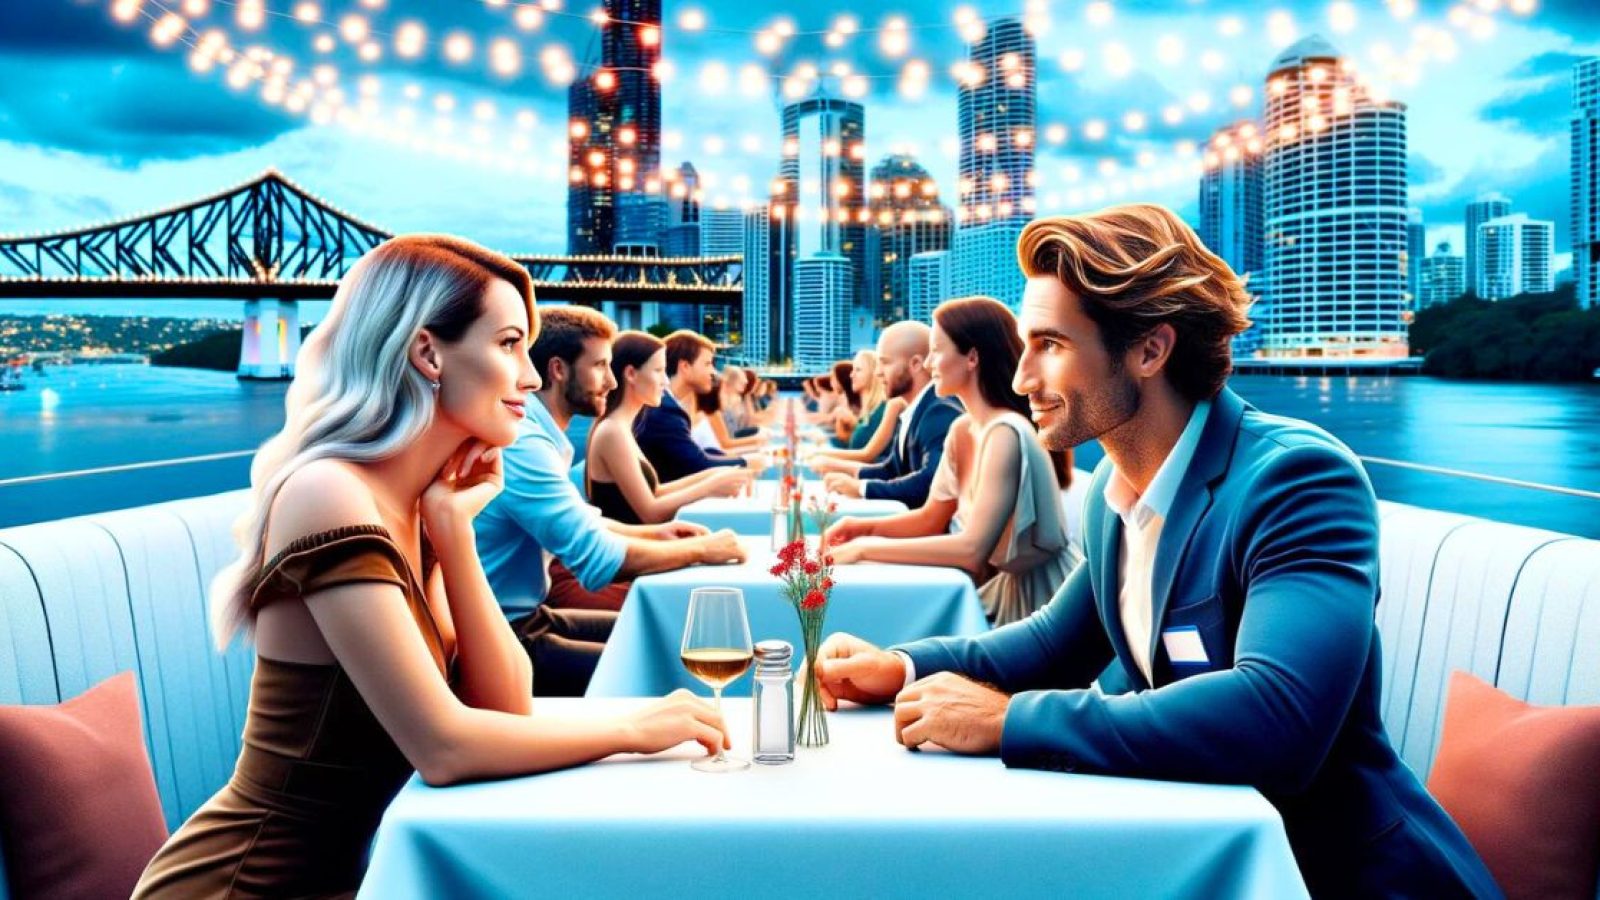 man and woman talking at blind dating event in a bar